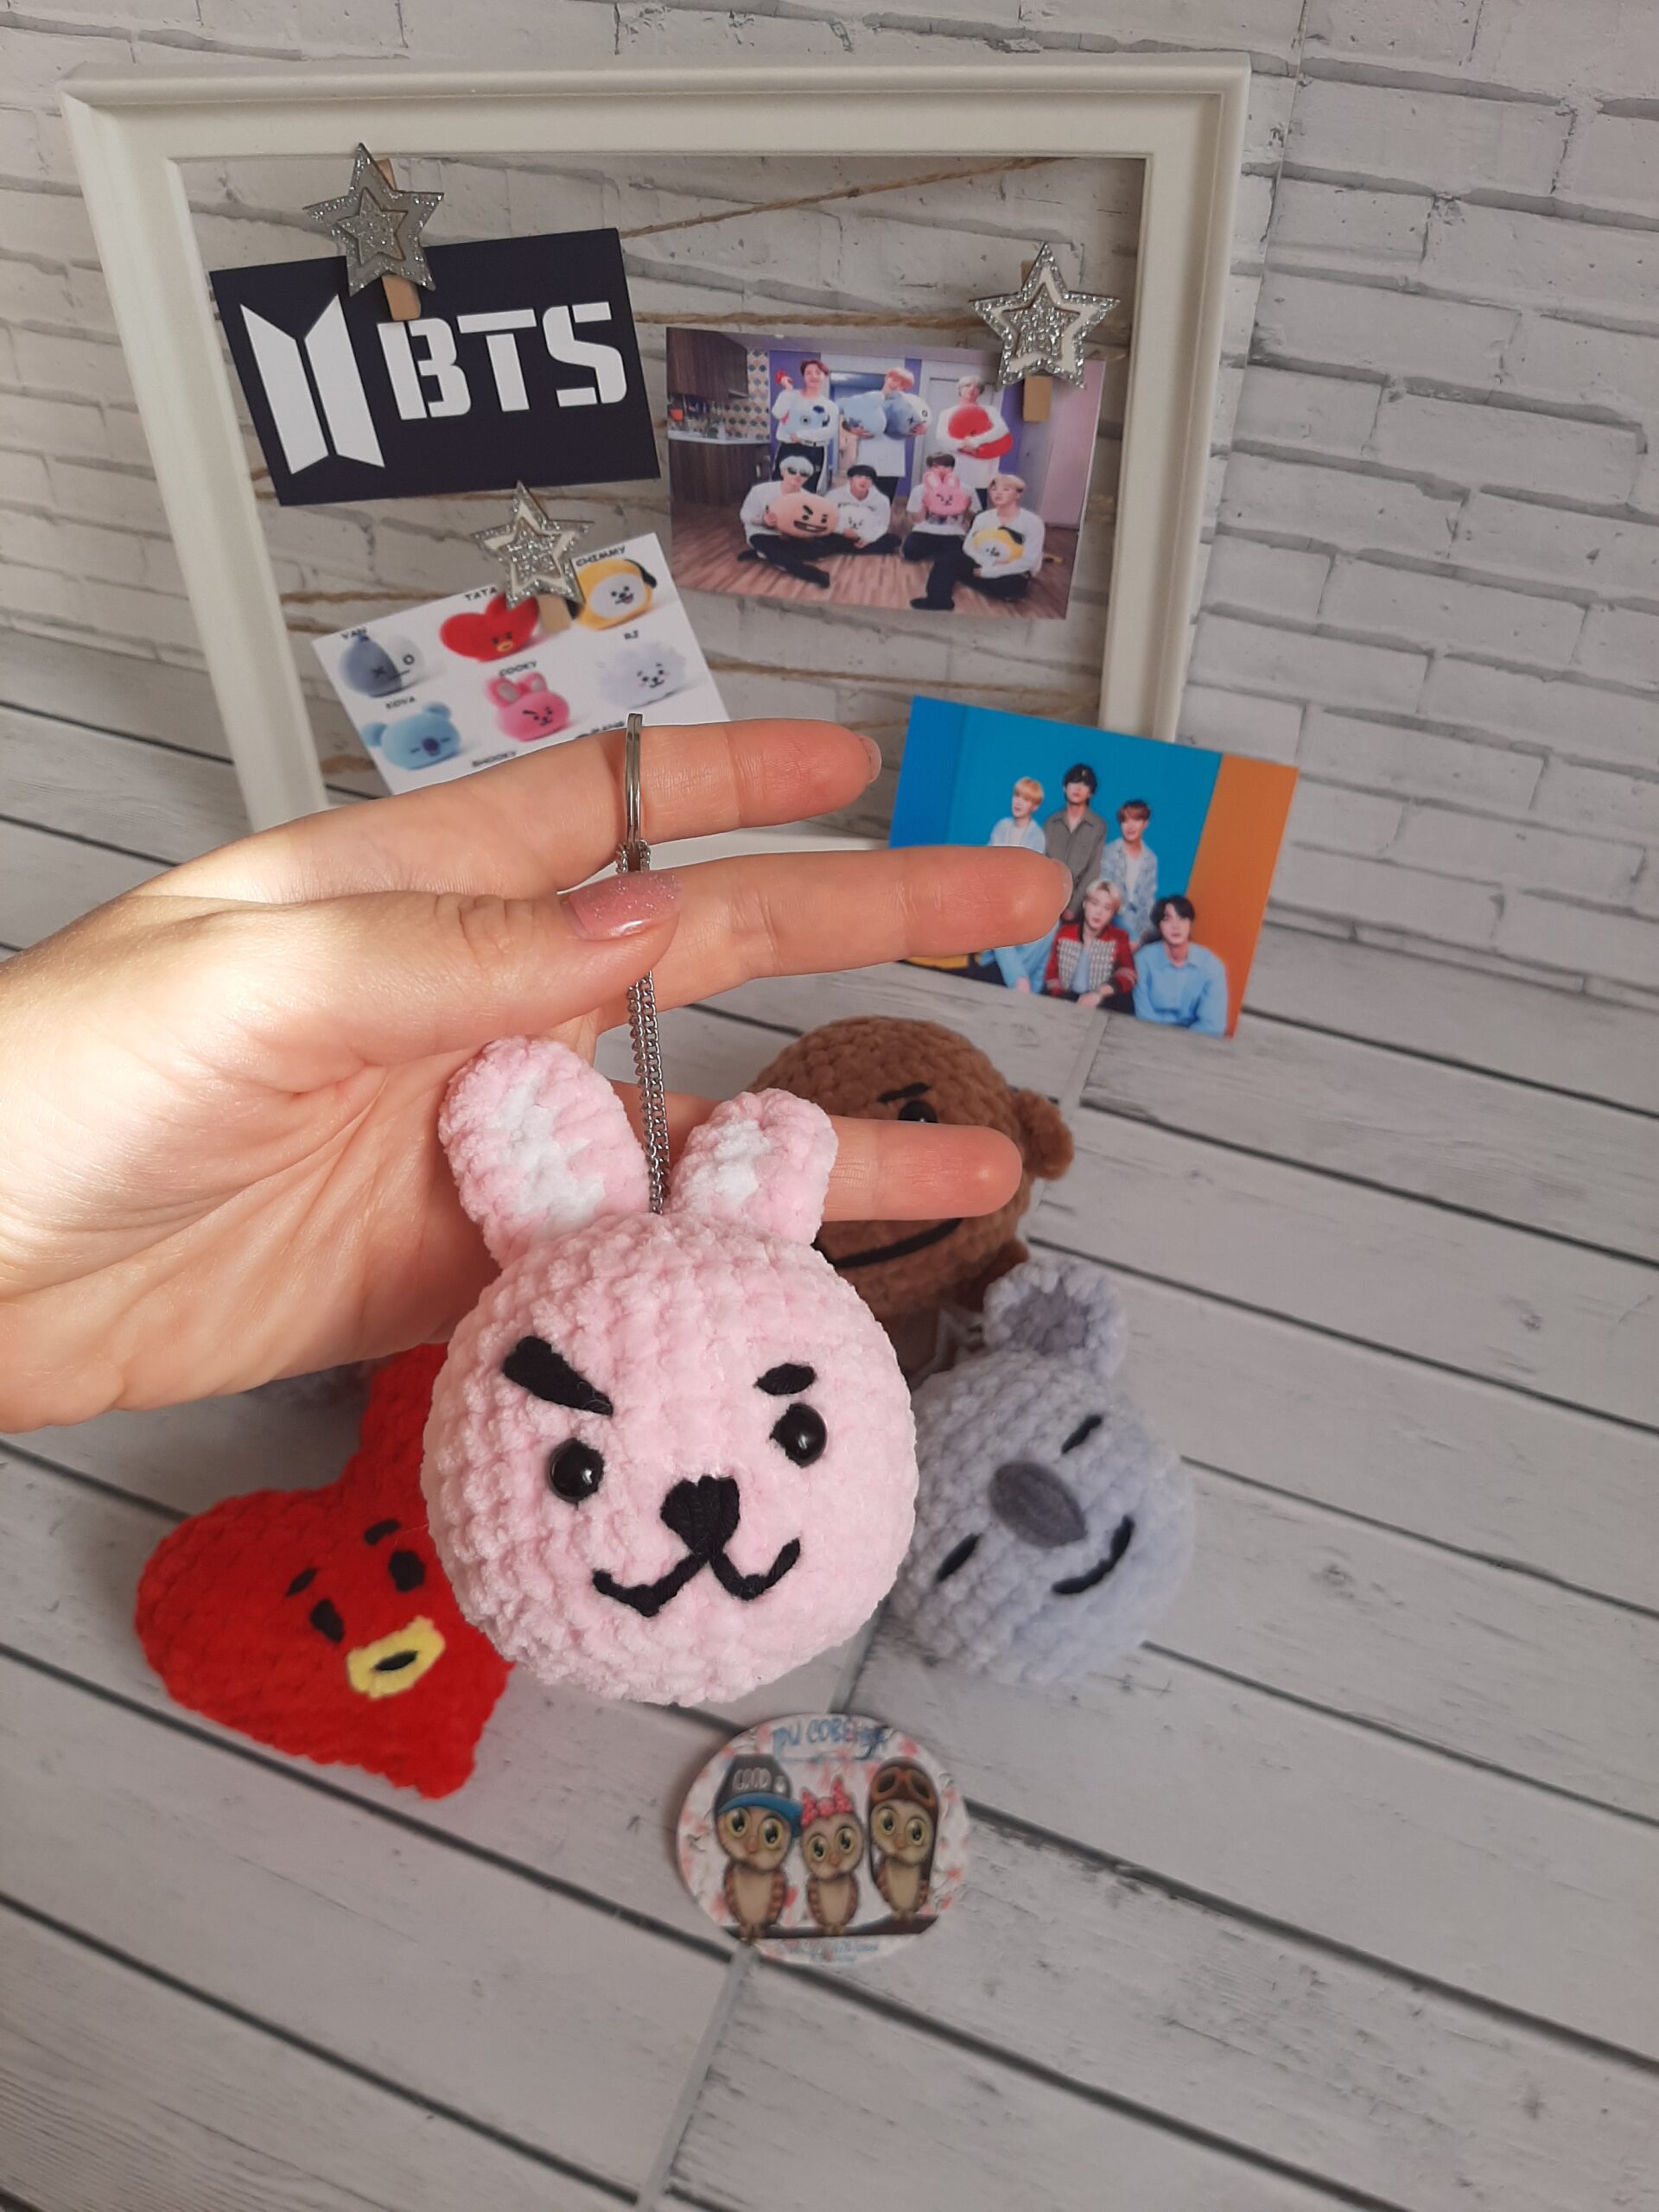 Bts Plushies, Bts Plushies Official Store